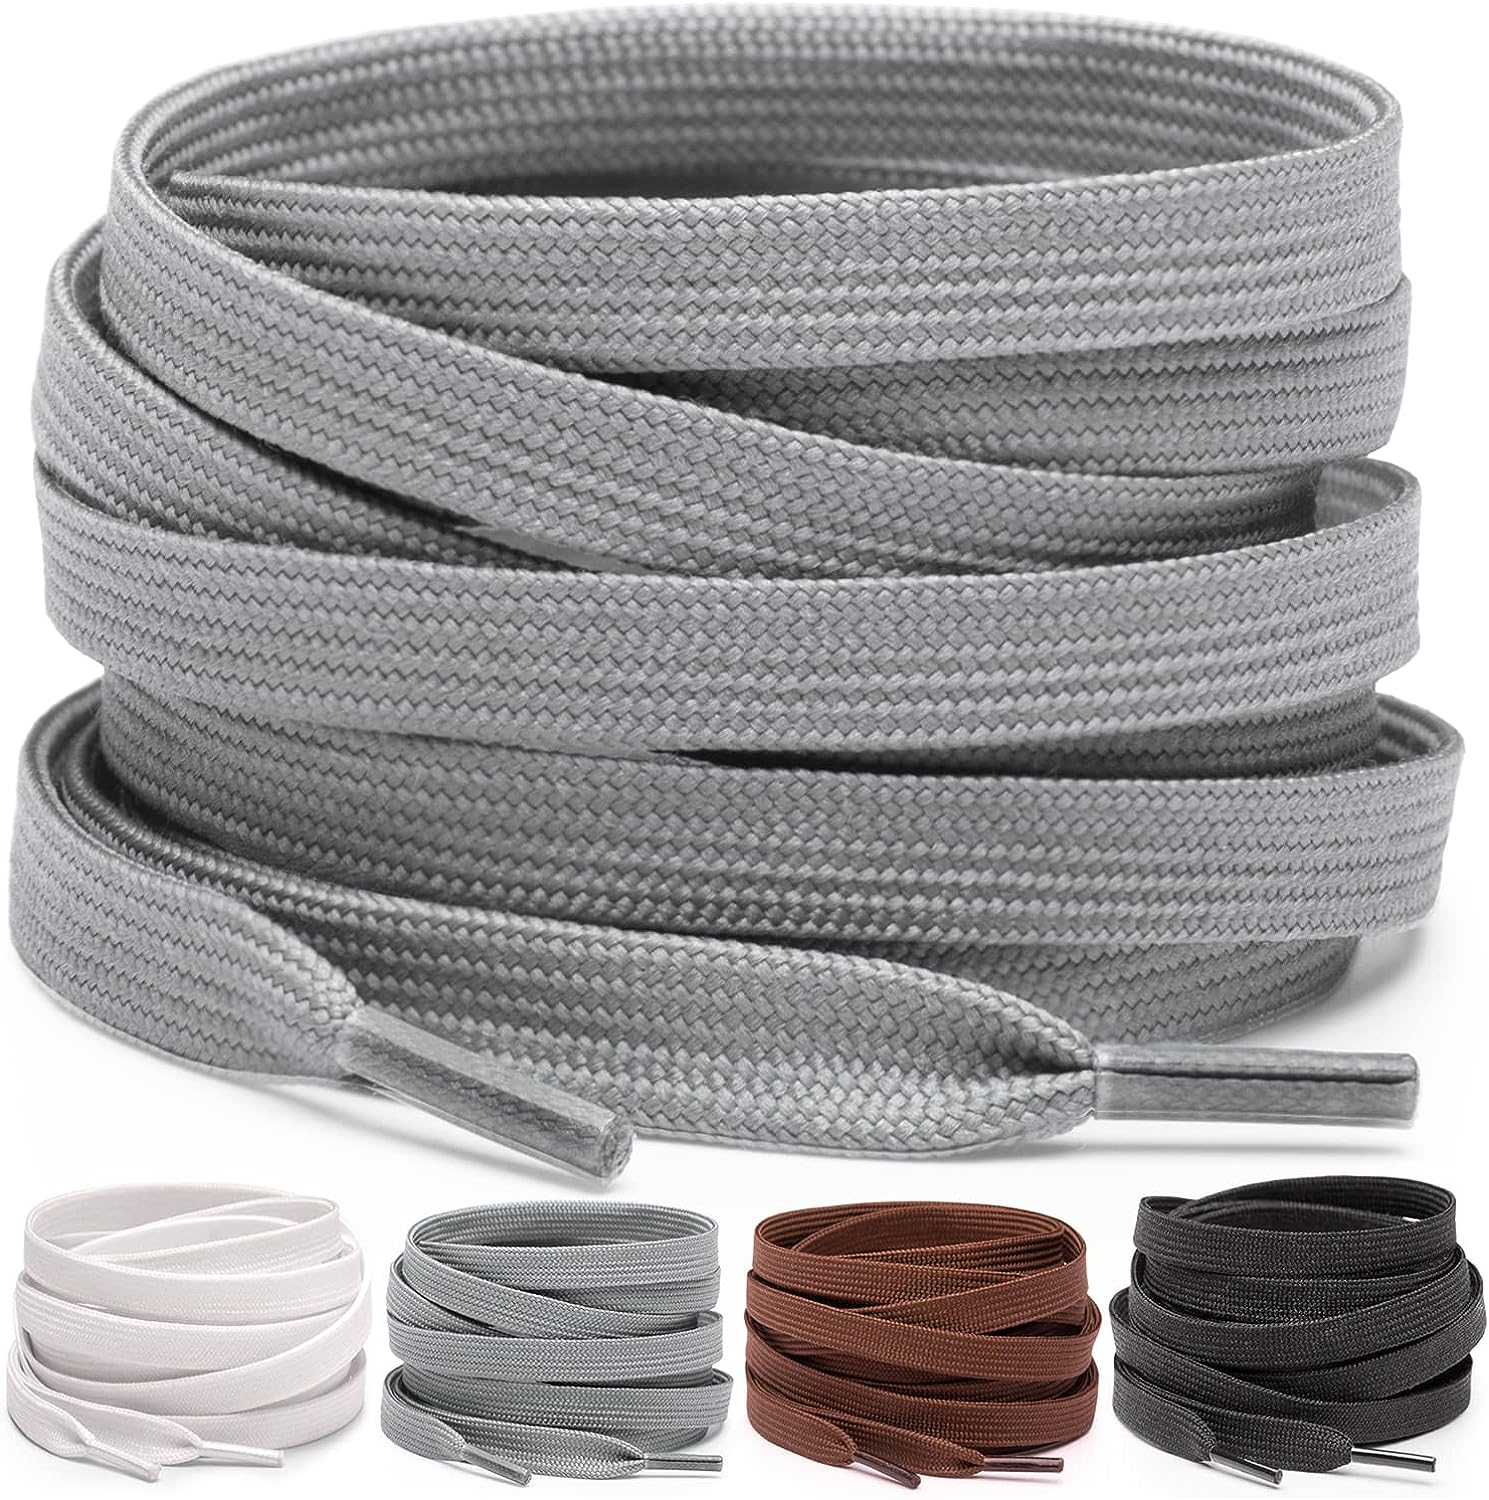 Miscly Flat Shoe Laces for Sneakers, Multiple Lengths [...]